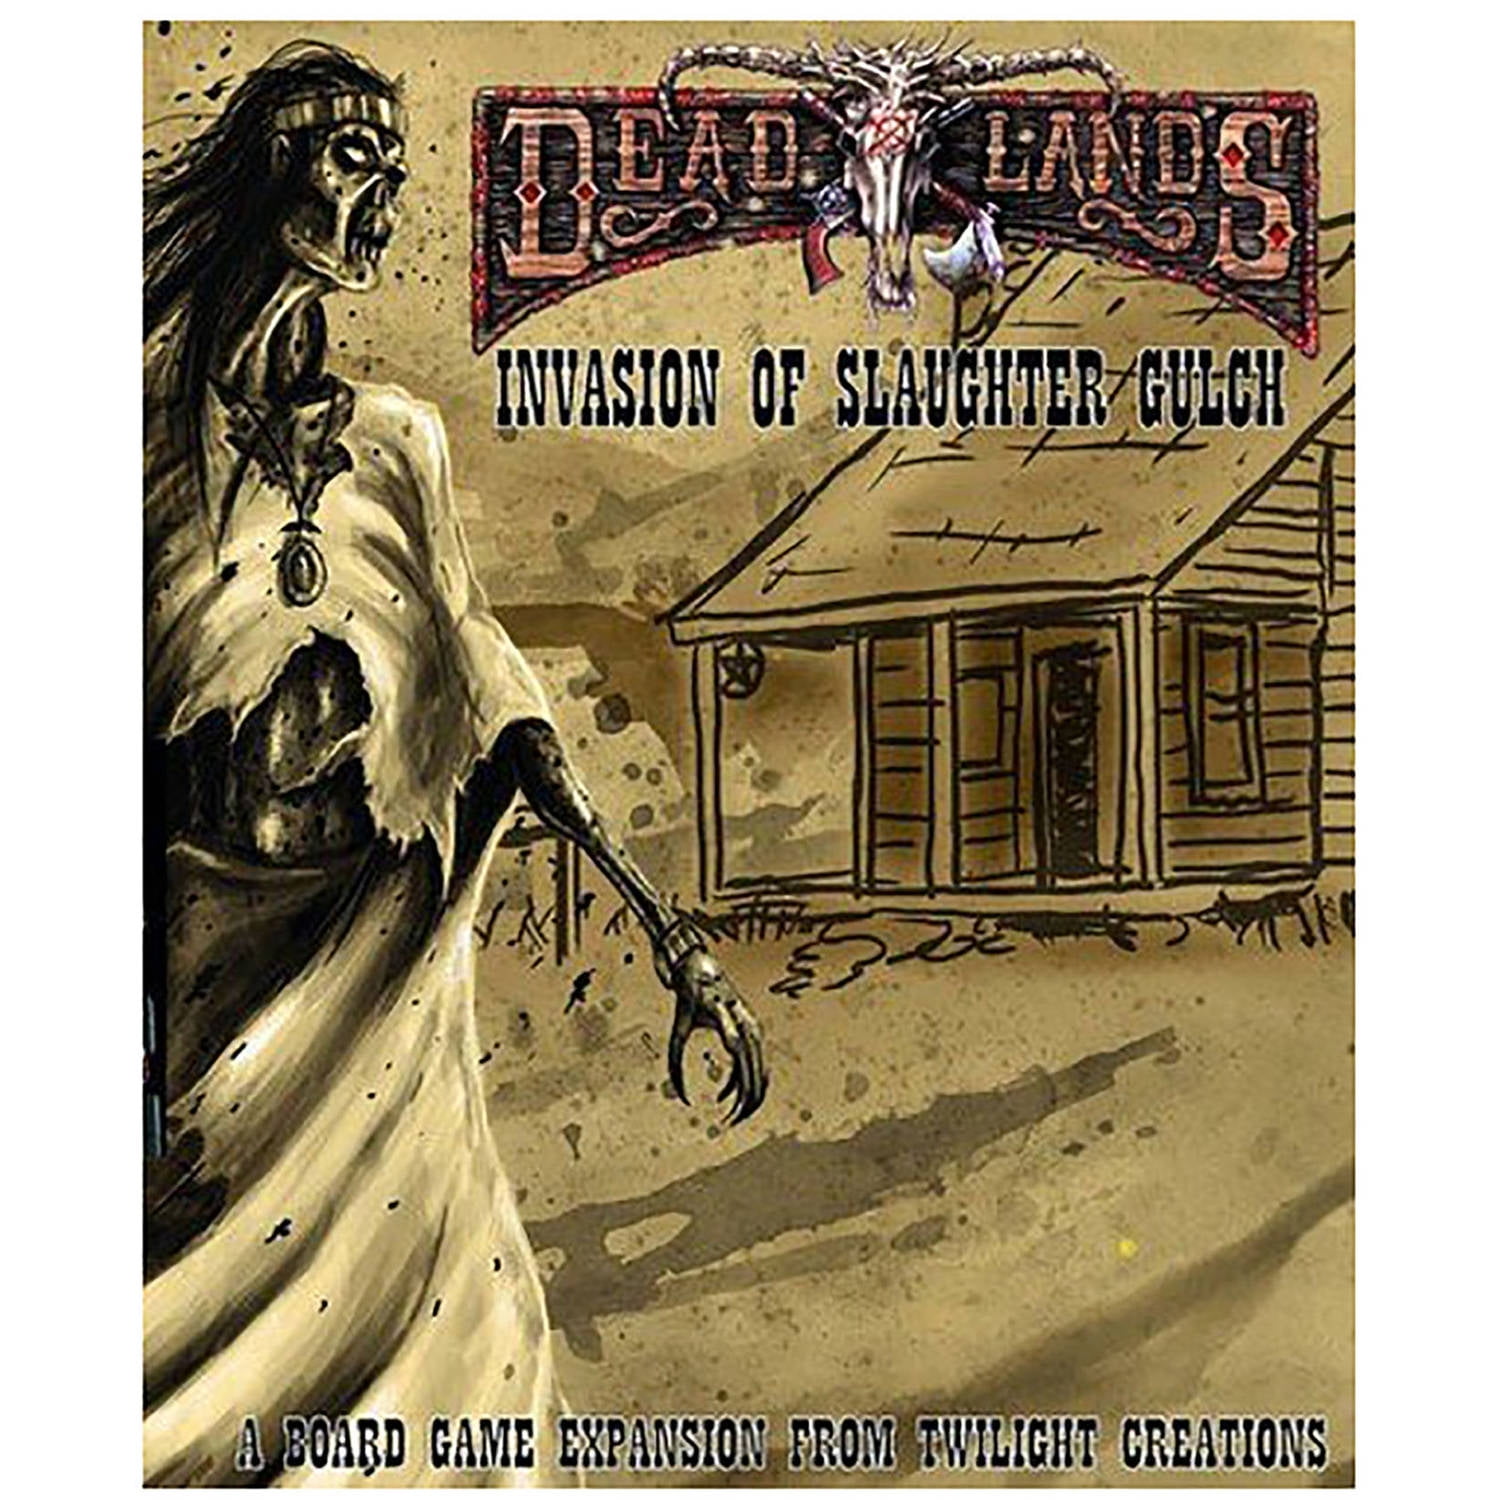 NEW Deadlands 2 Invasion Of Slaughter Gulch Board Game Expansion Pack Twilight 